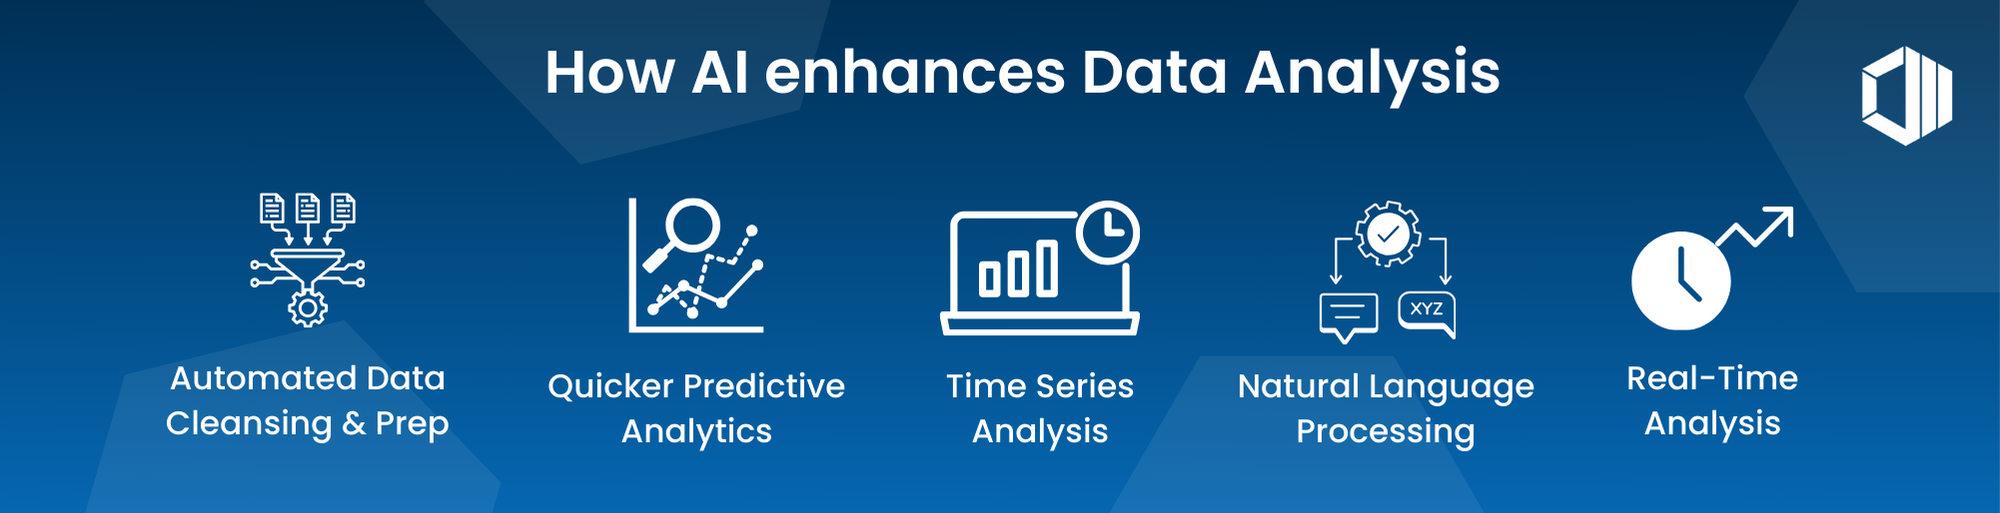 Banner showcasing key features of AI in data analysis: Automating Data Cleansing and Preparation,  Predictive Modeling,  Time Series Analysis,  Natural Language Processing (NLP), and Real-Time Analysis.